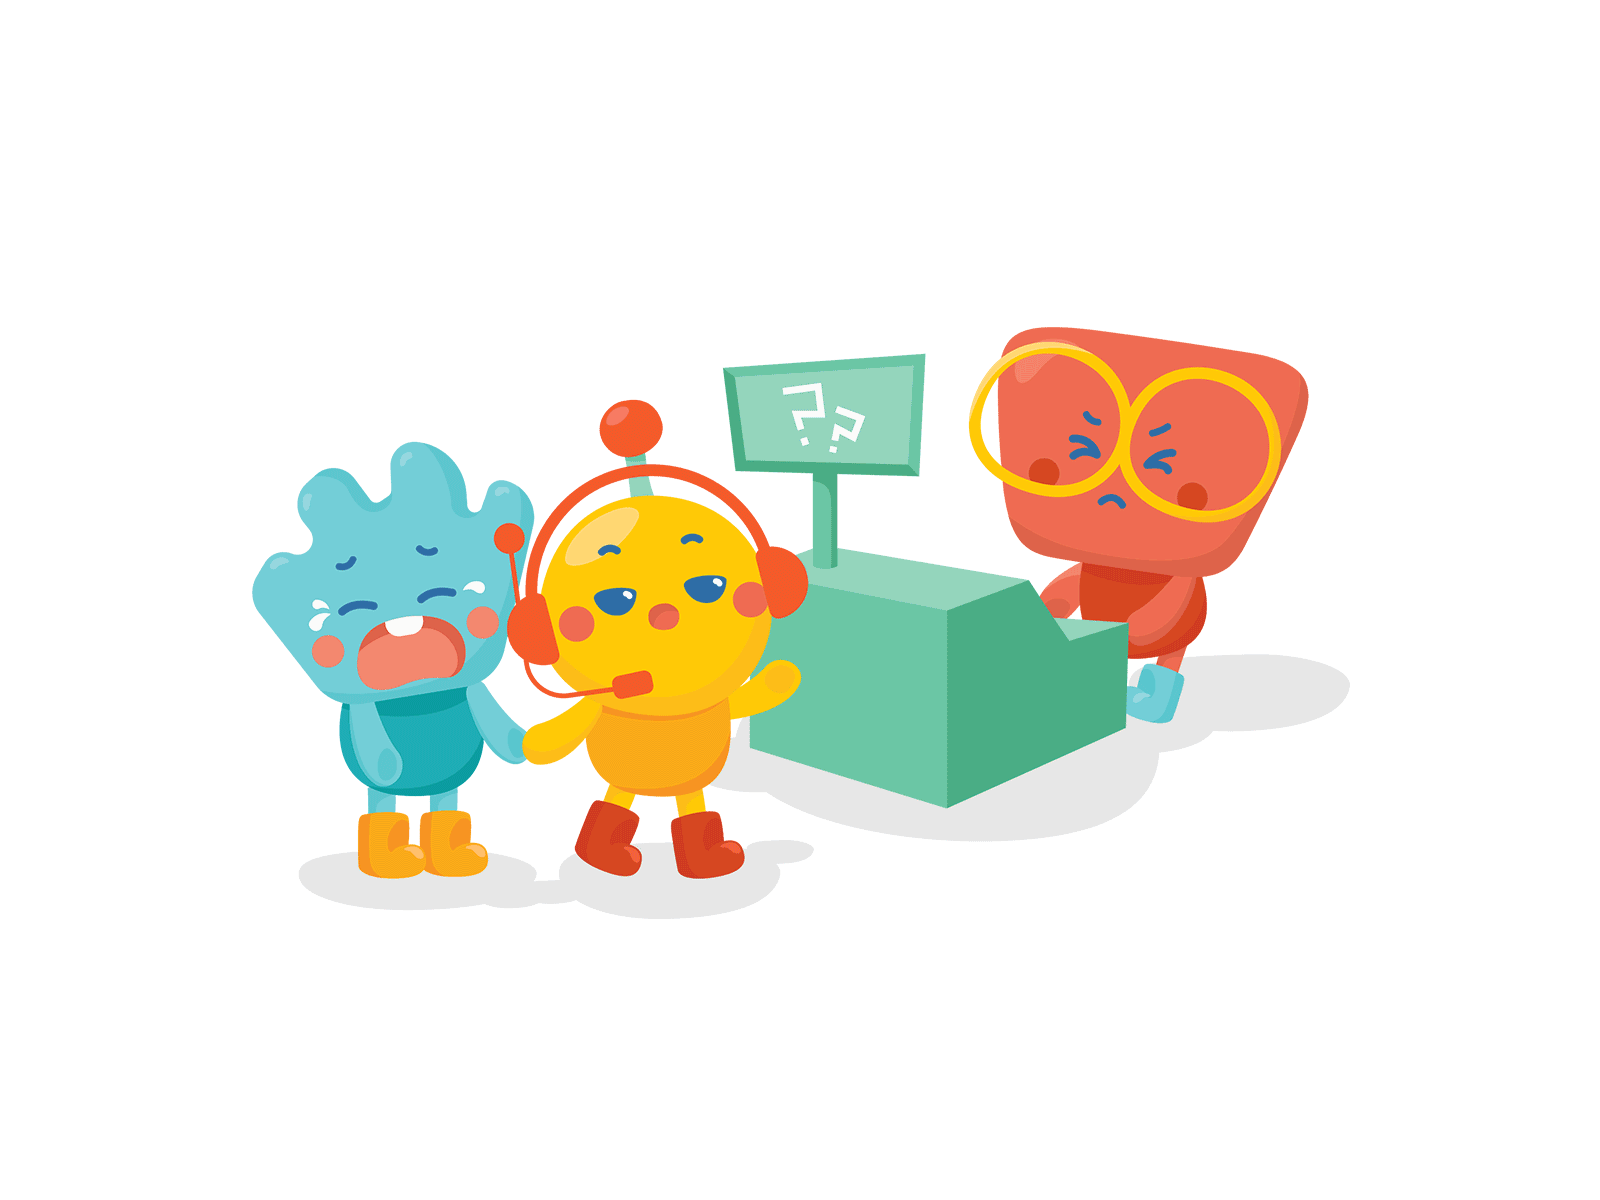 KitaBeli - Mascot, Visual and Brand Identity brand identity branding characters flat illustration gestalt graphic design grocery shopping group buying illustration mascot online application online shopping pattern primary colors proximity visual identity